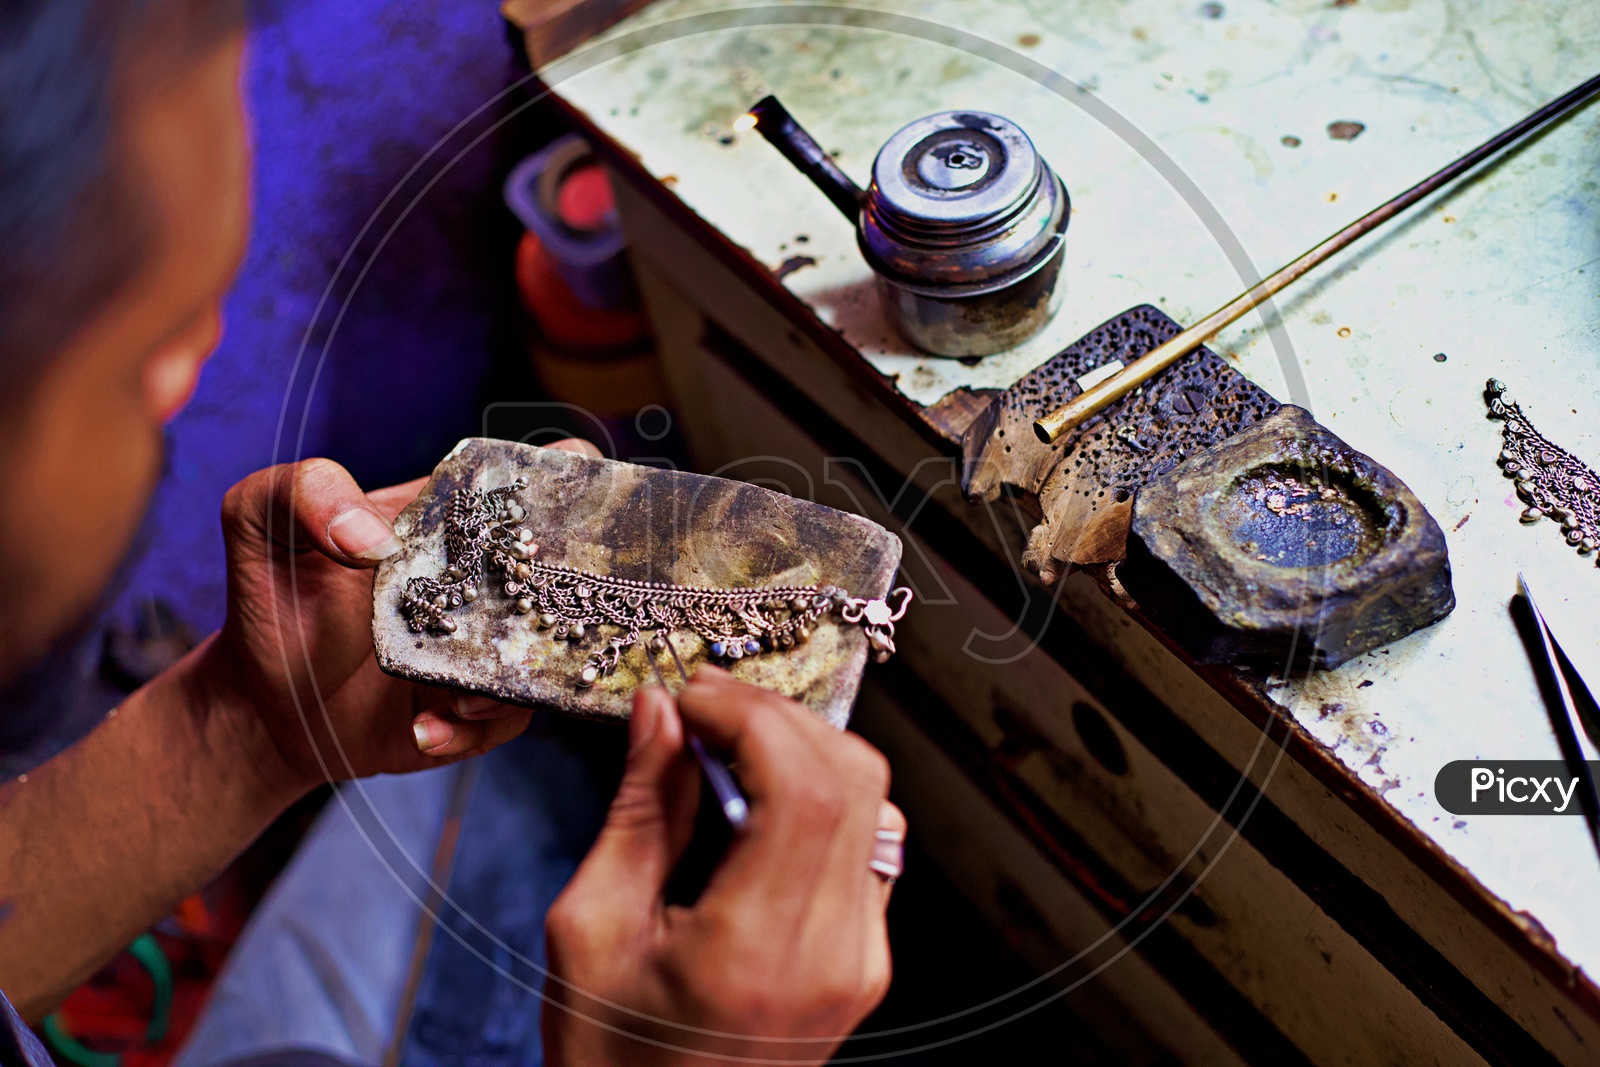 Silver smith working on jewellery.